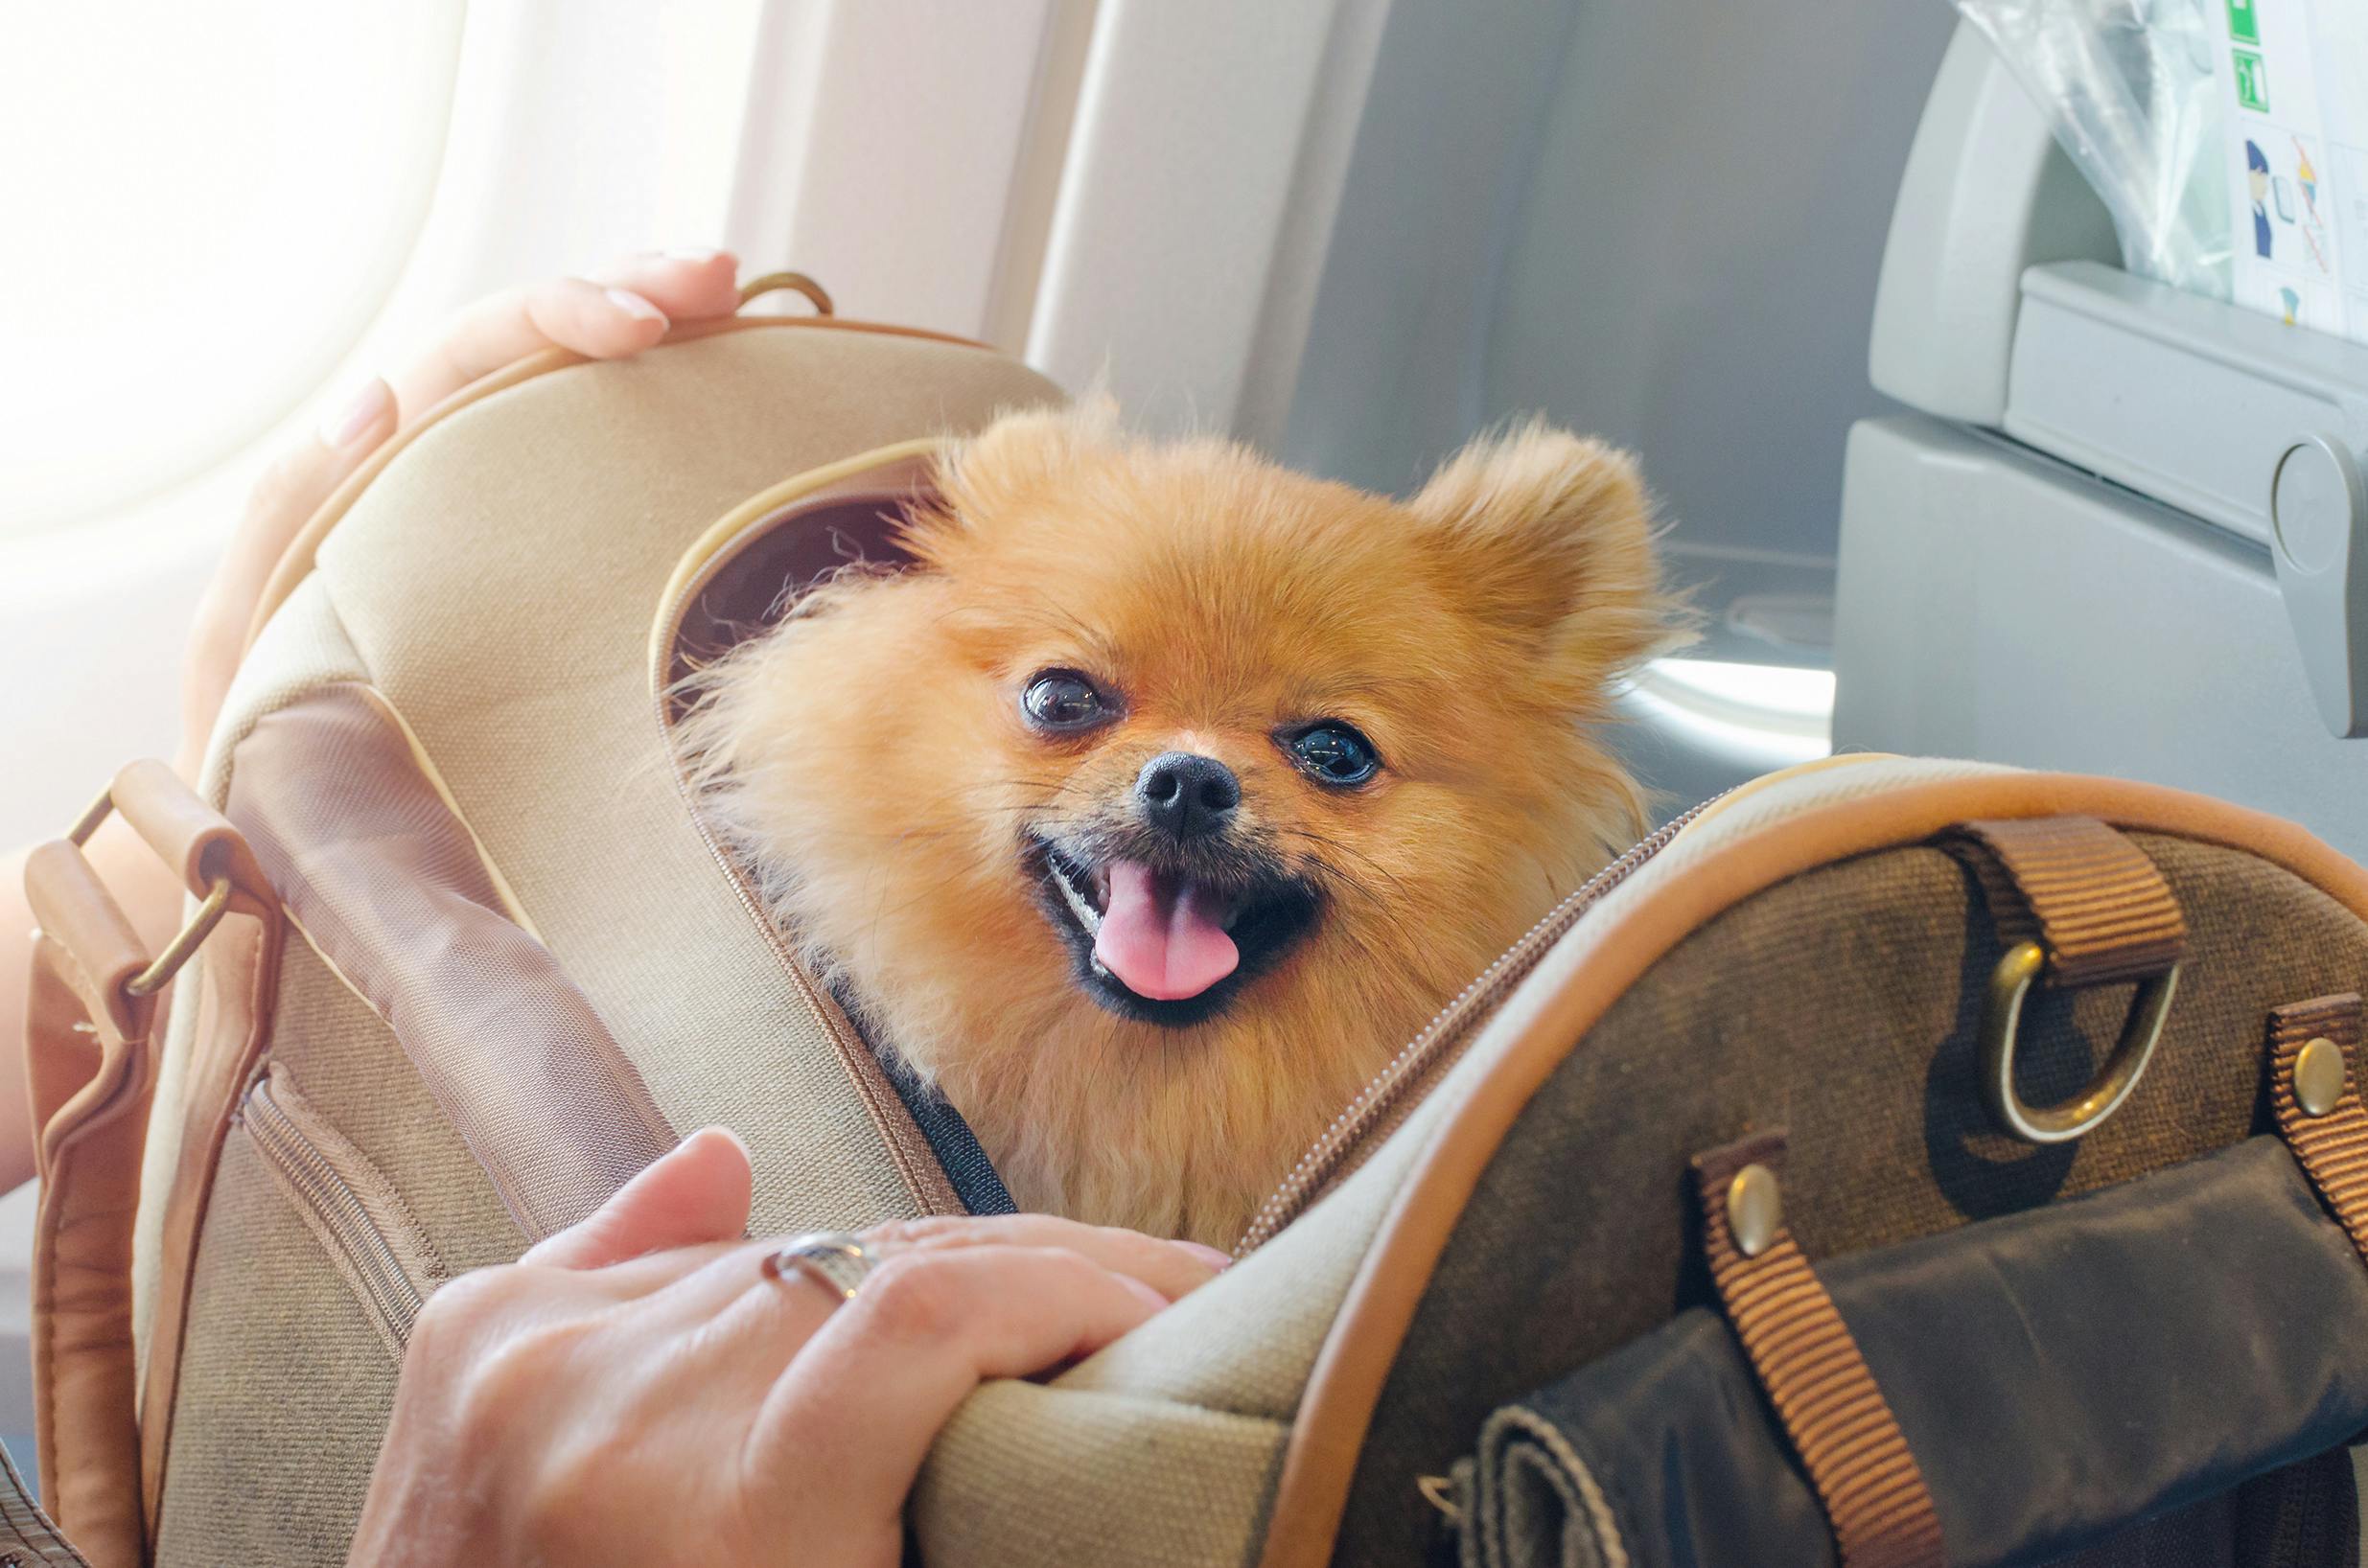 which airline allow dogs in cabin